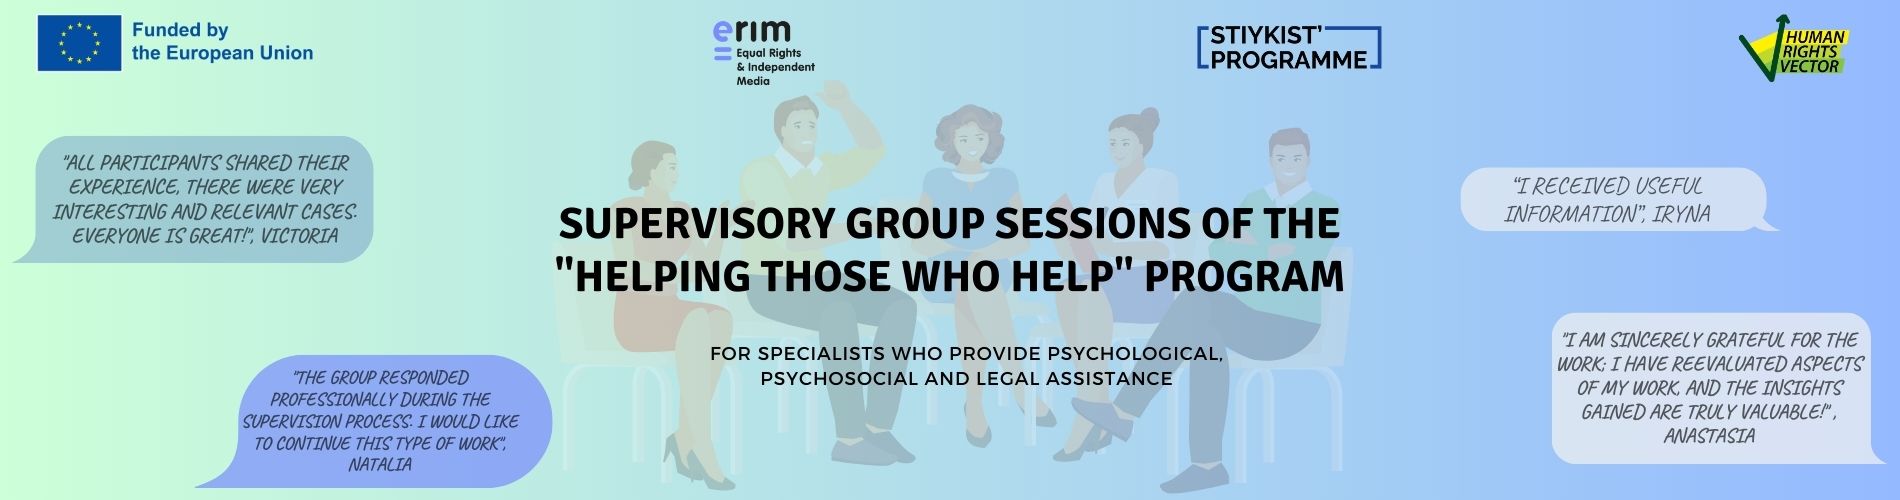 Supervisory group sessions of the "Helping Those Who Help" program